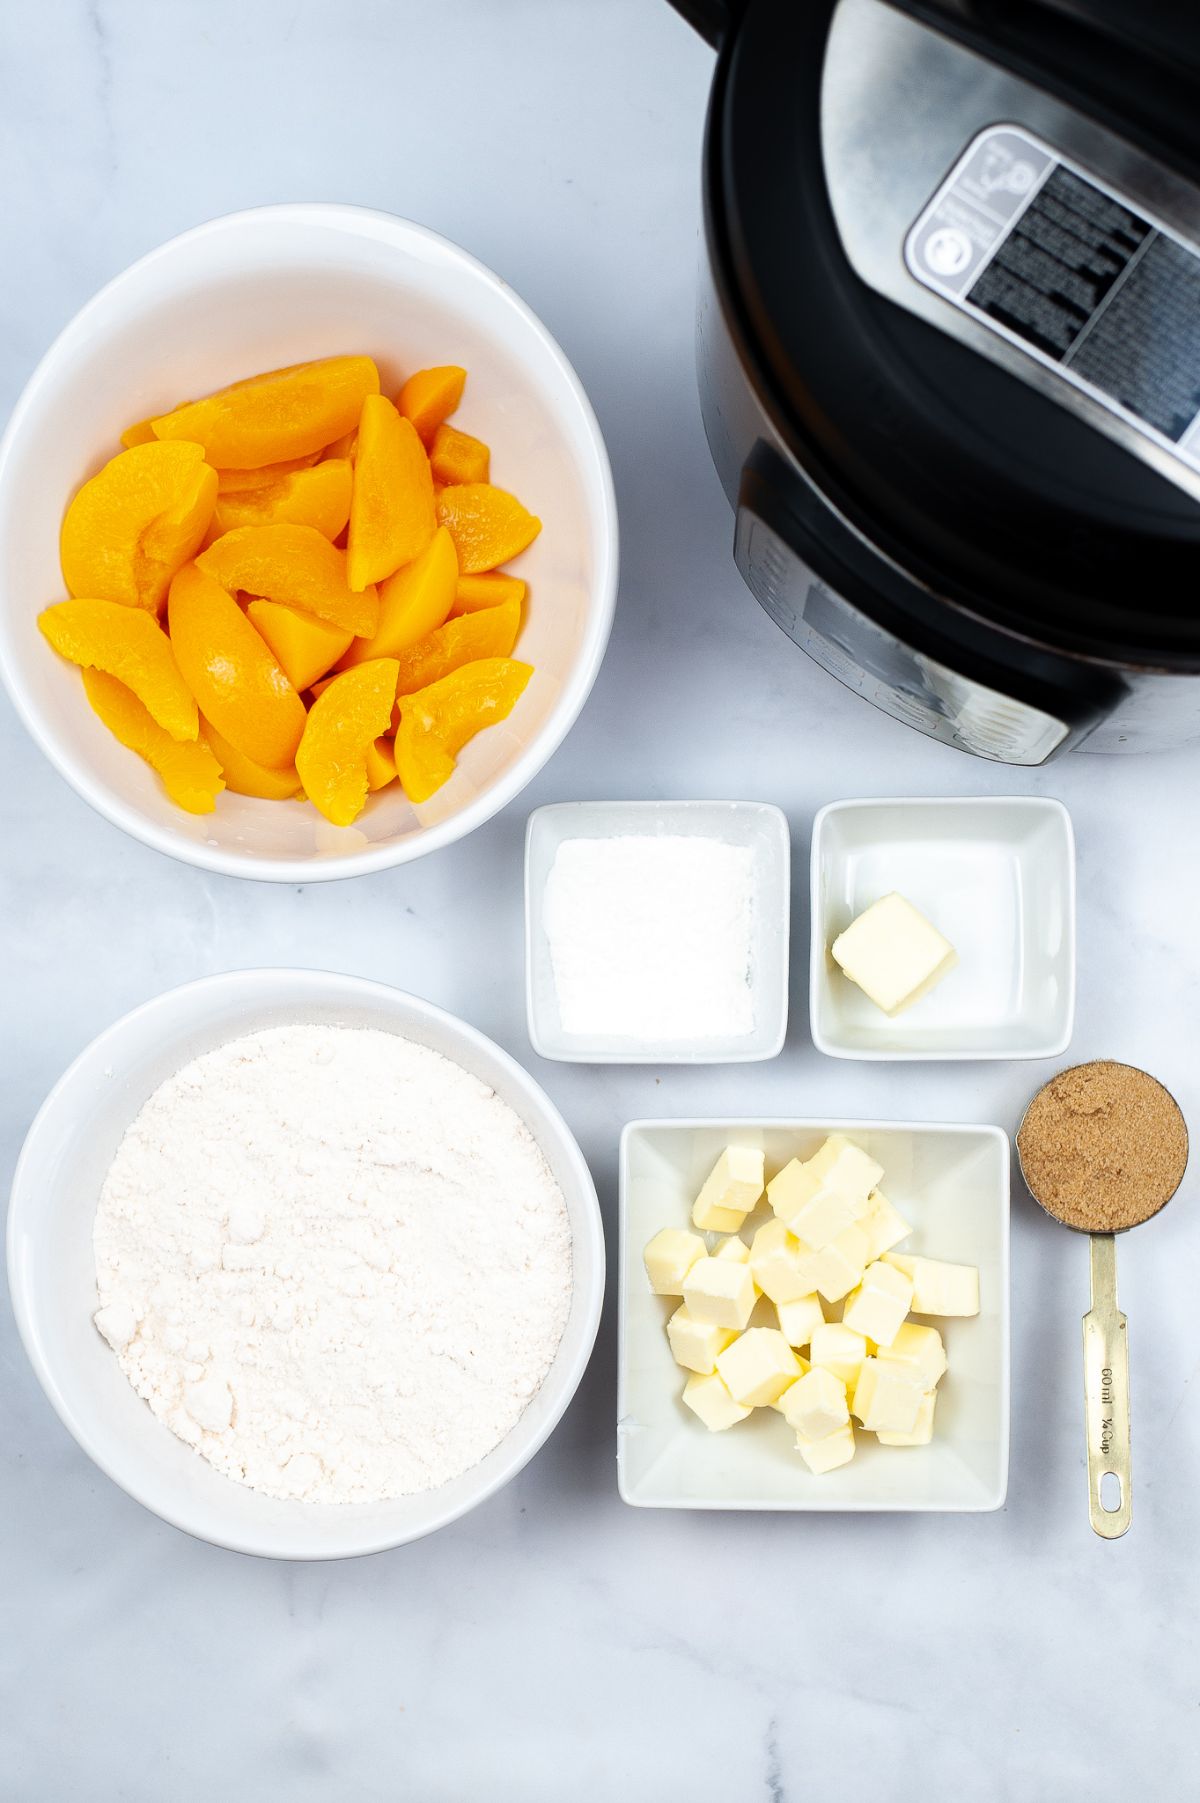 An image of ingredients used to make Instant Pot Peach Cobbler: peaches, cake mix, butter, brown sugar, and cornstarch.